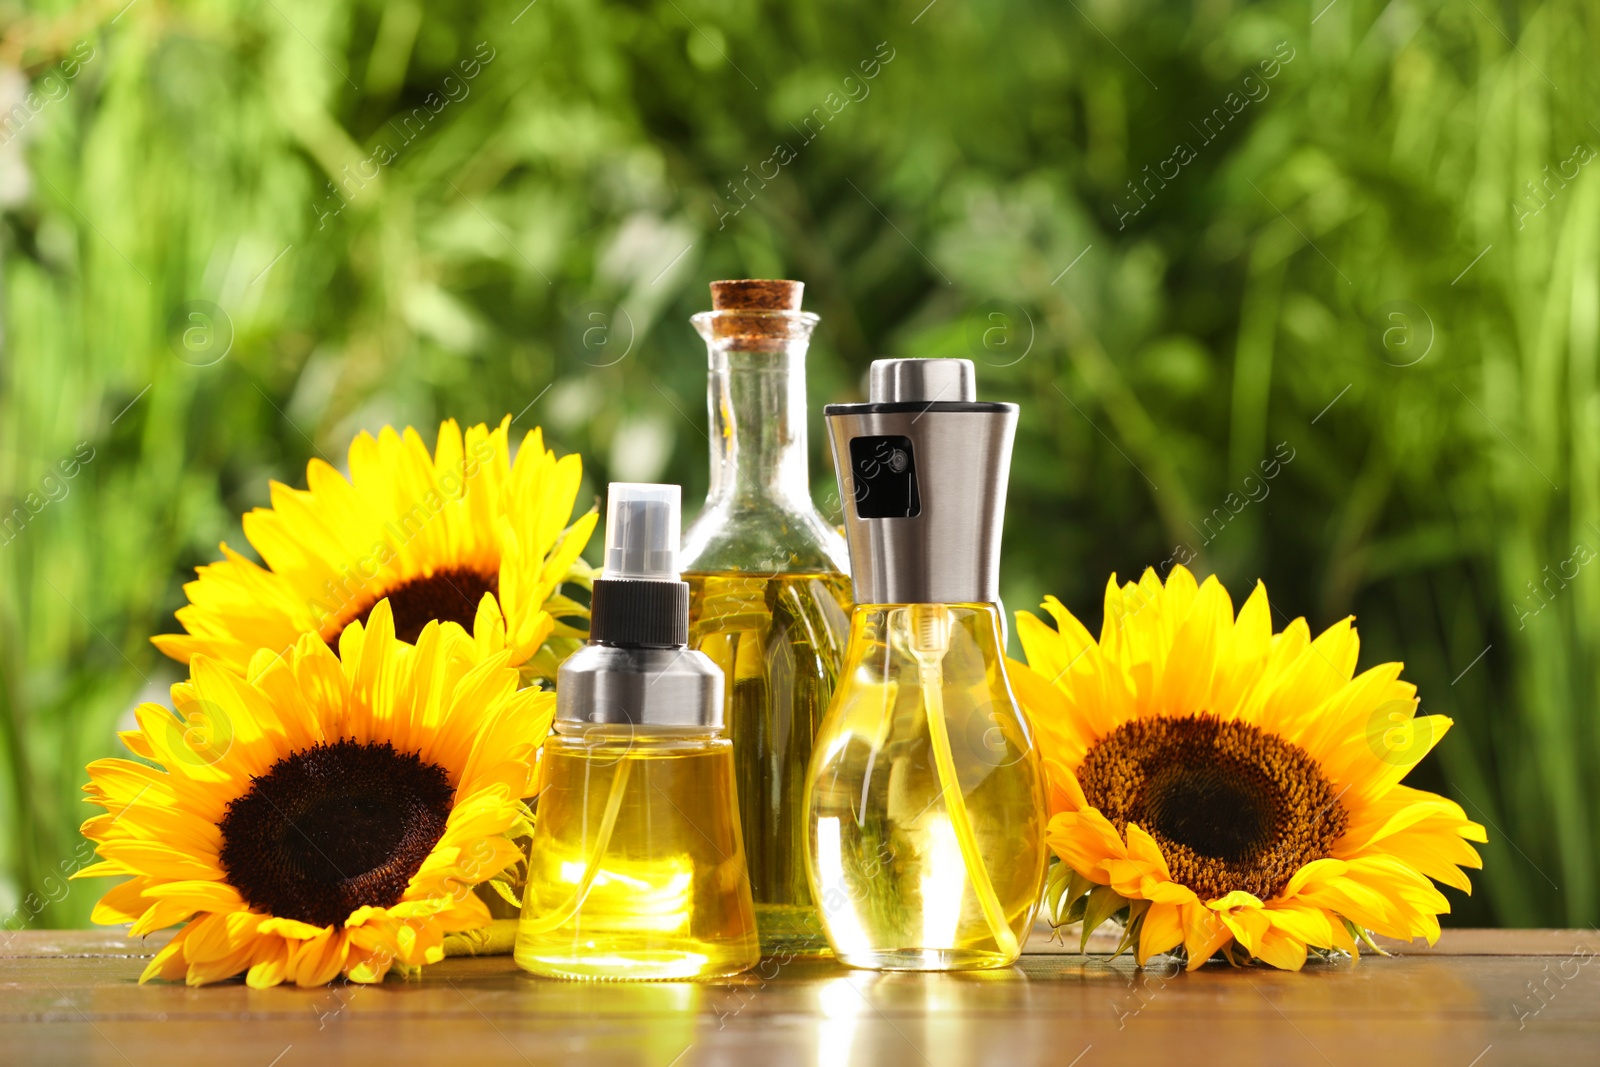 Photo of Sunflowers and many different bottles with cooking oil on wooden table against blurred green background